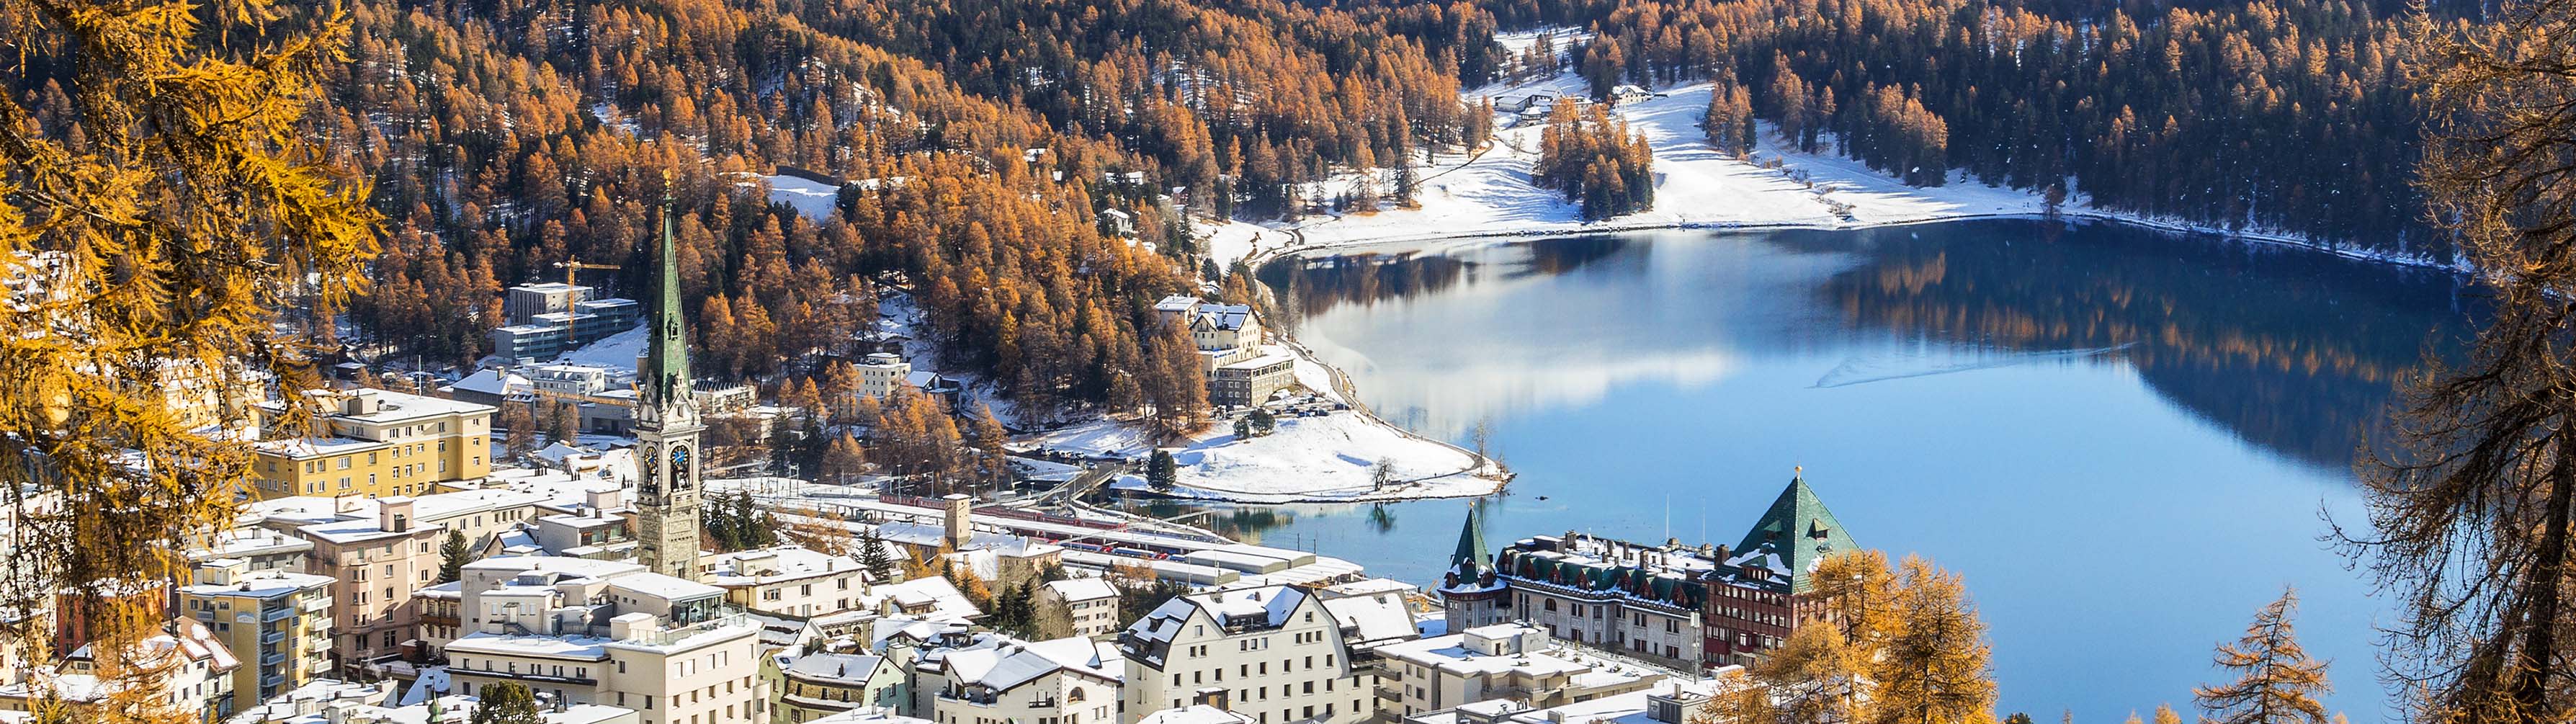 The beautiful, snow-covered village of St. Moritz sits beside a body of water on a clear day.